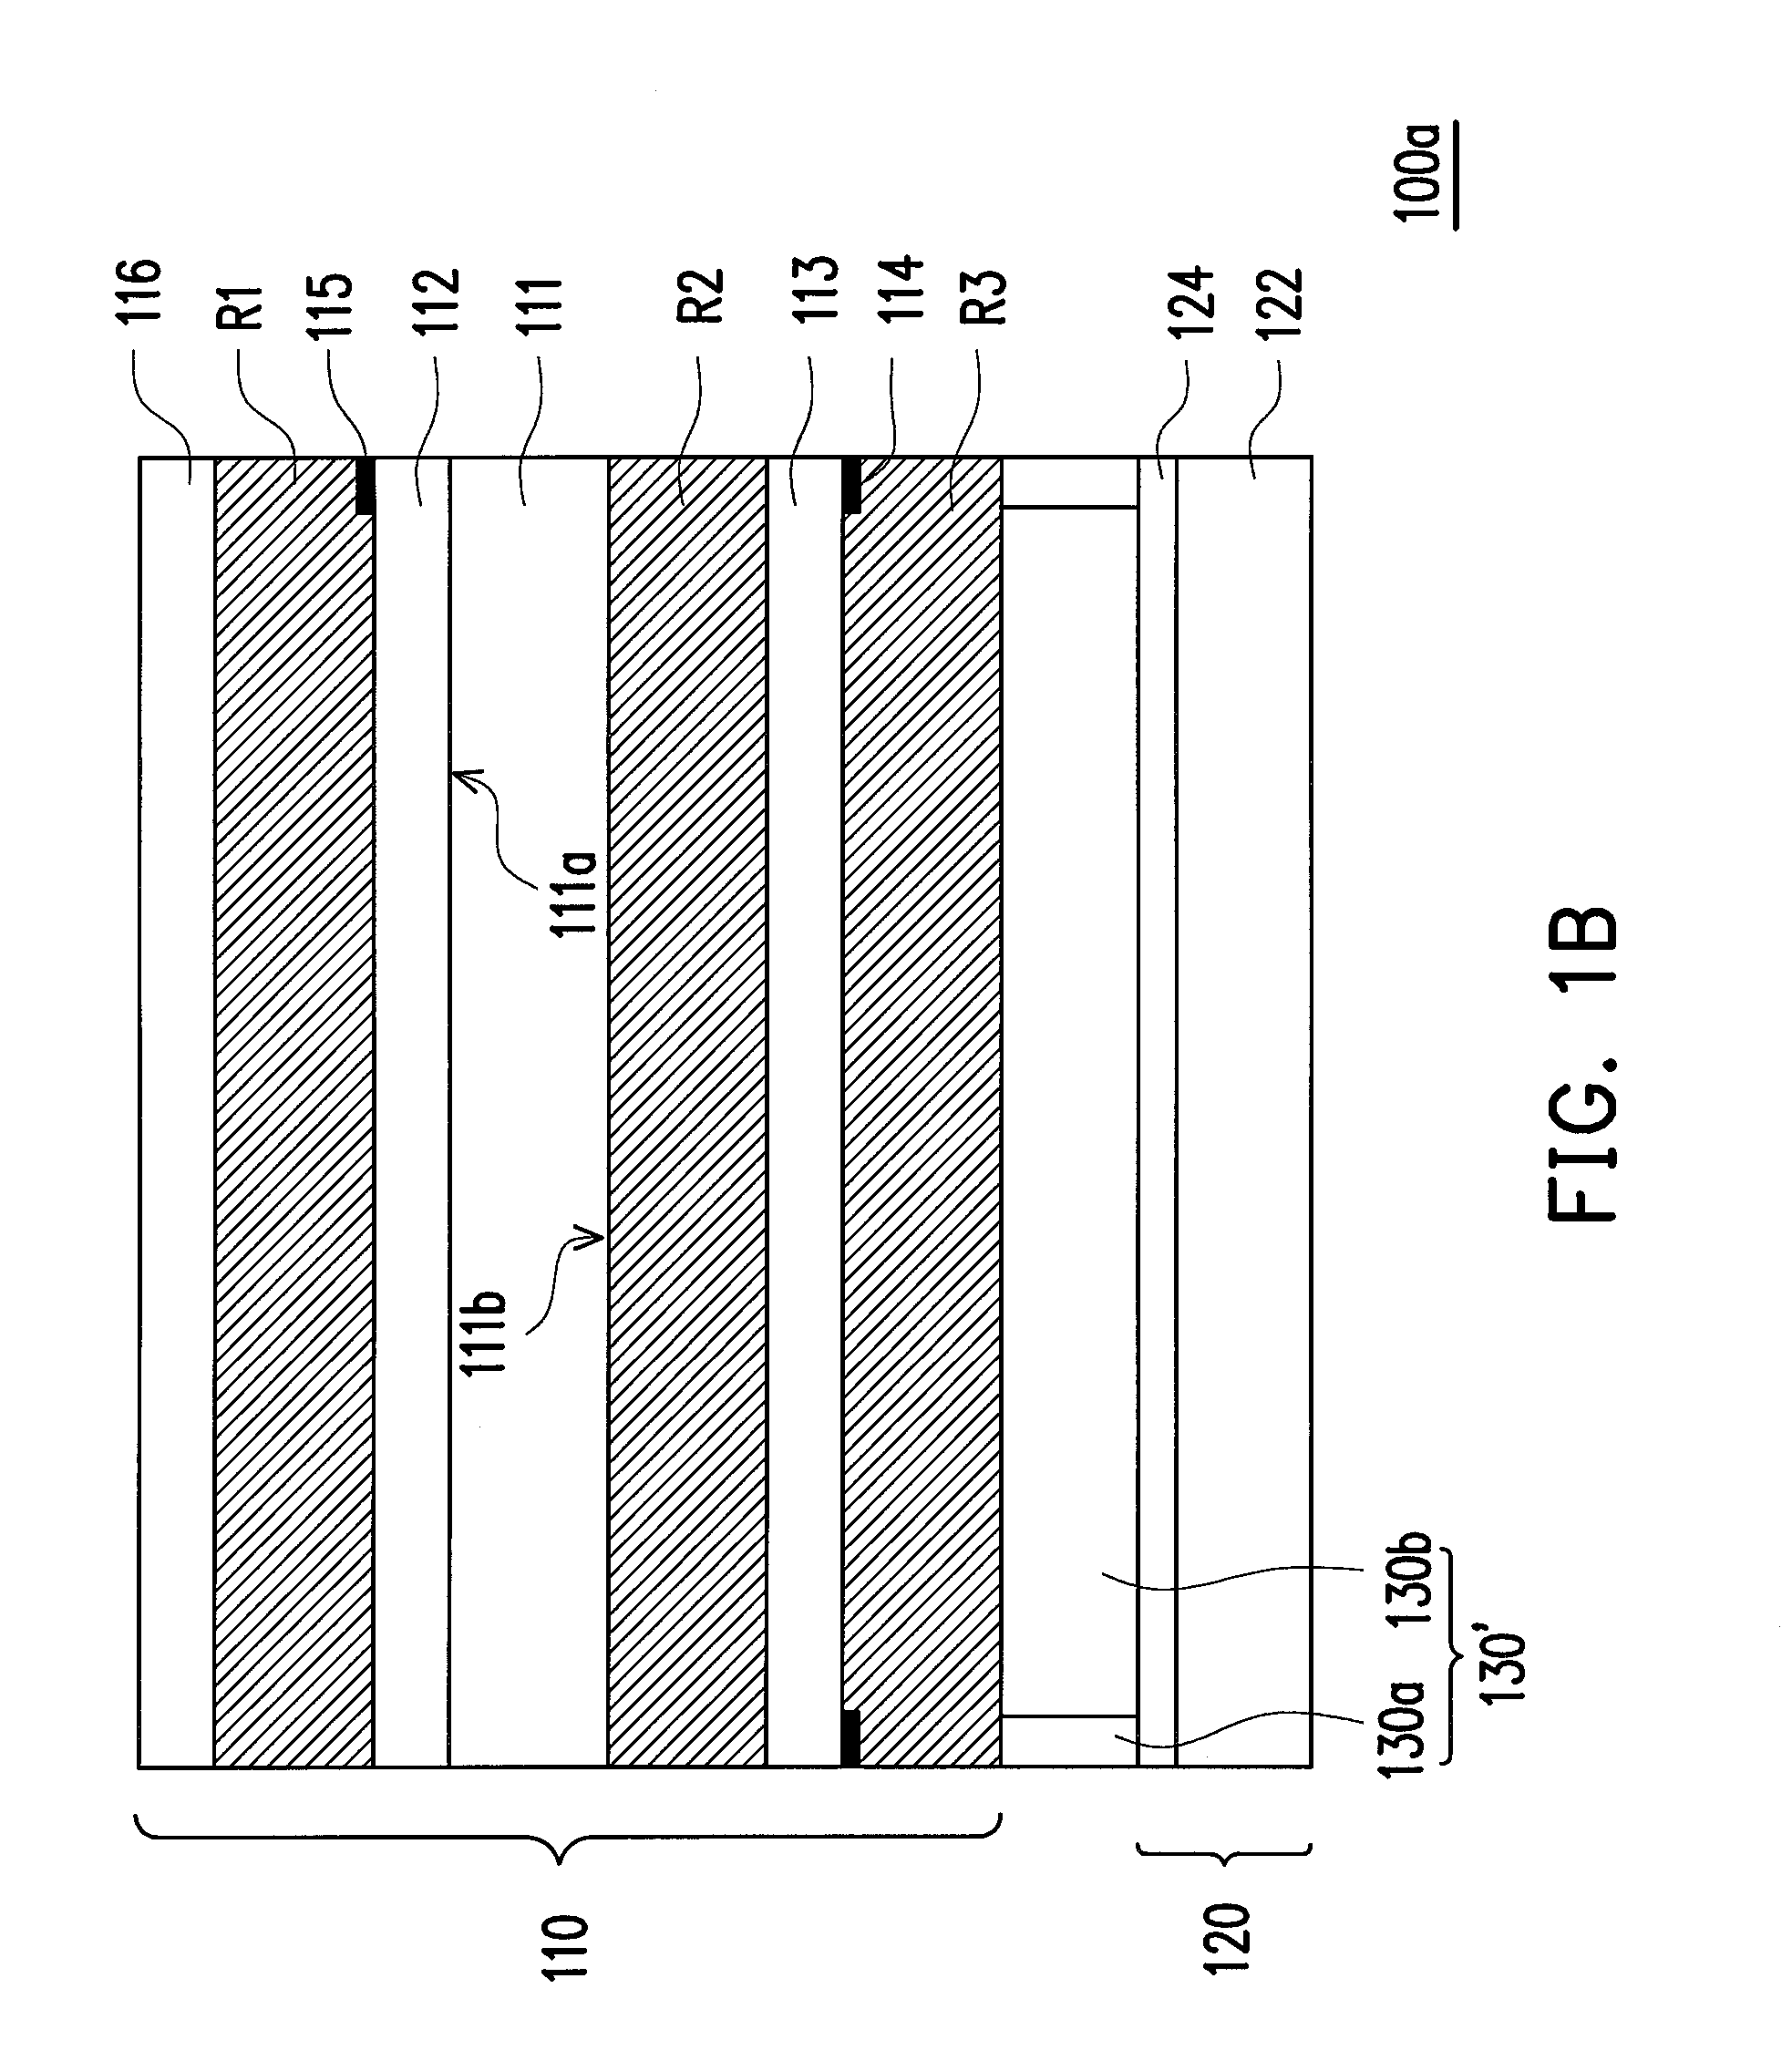 Touch-sensing display apparatus and fabricating method thereof